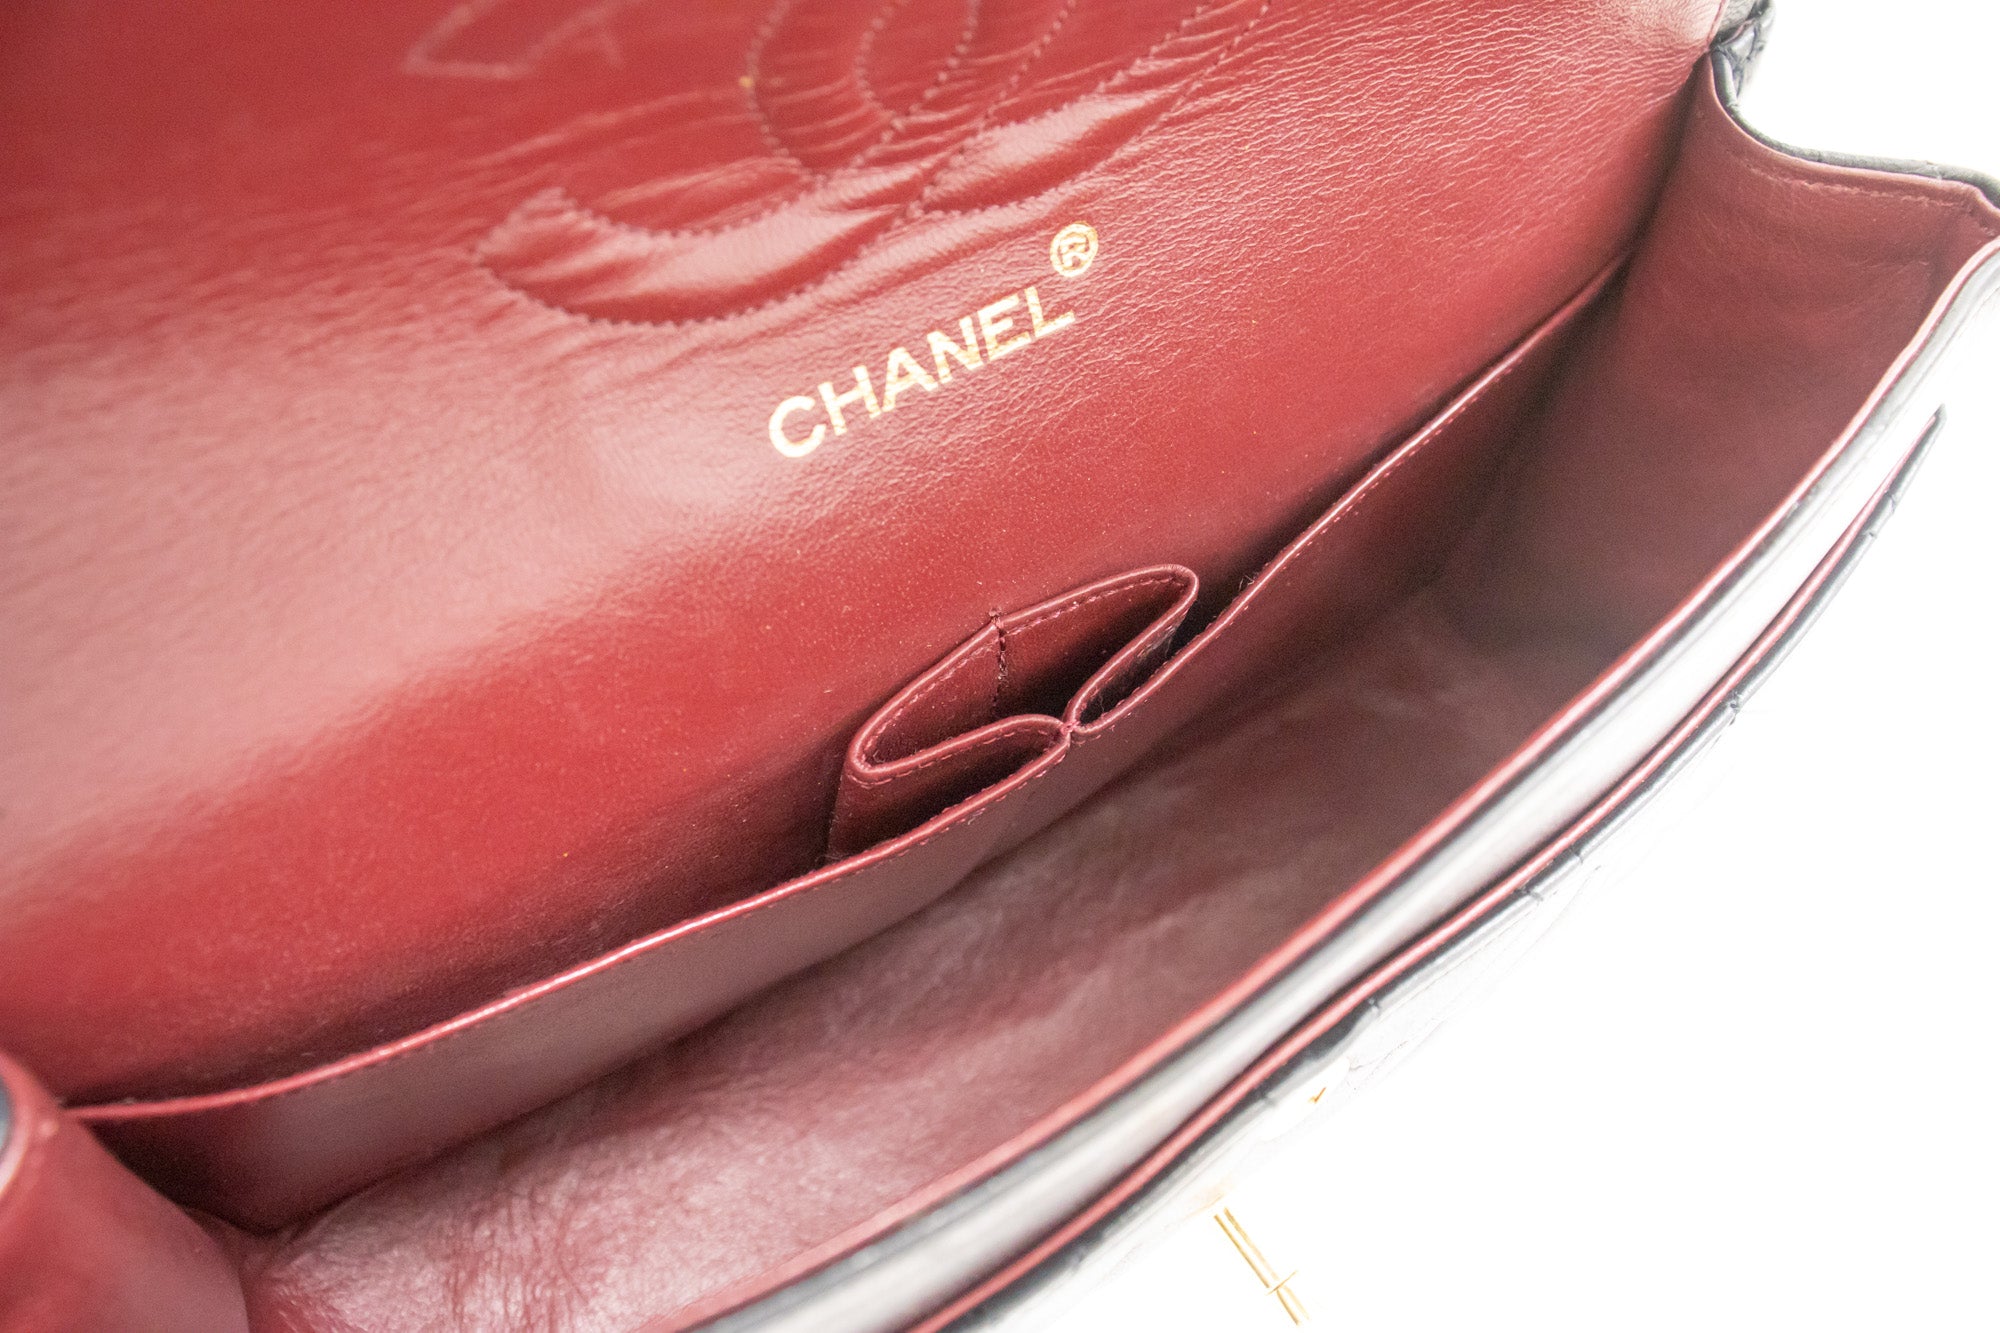 Chanel Classic Double Flap Medium Leather Shoulder Bag Red